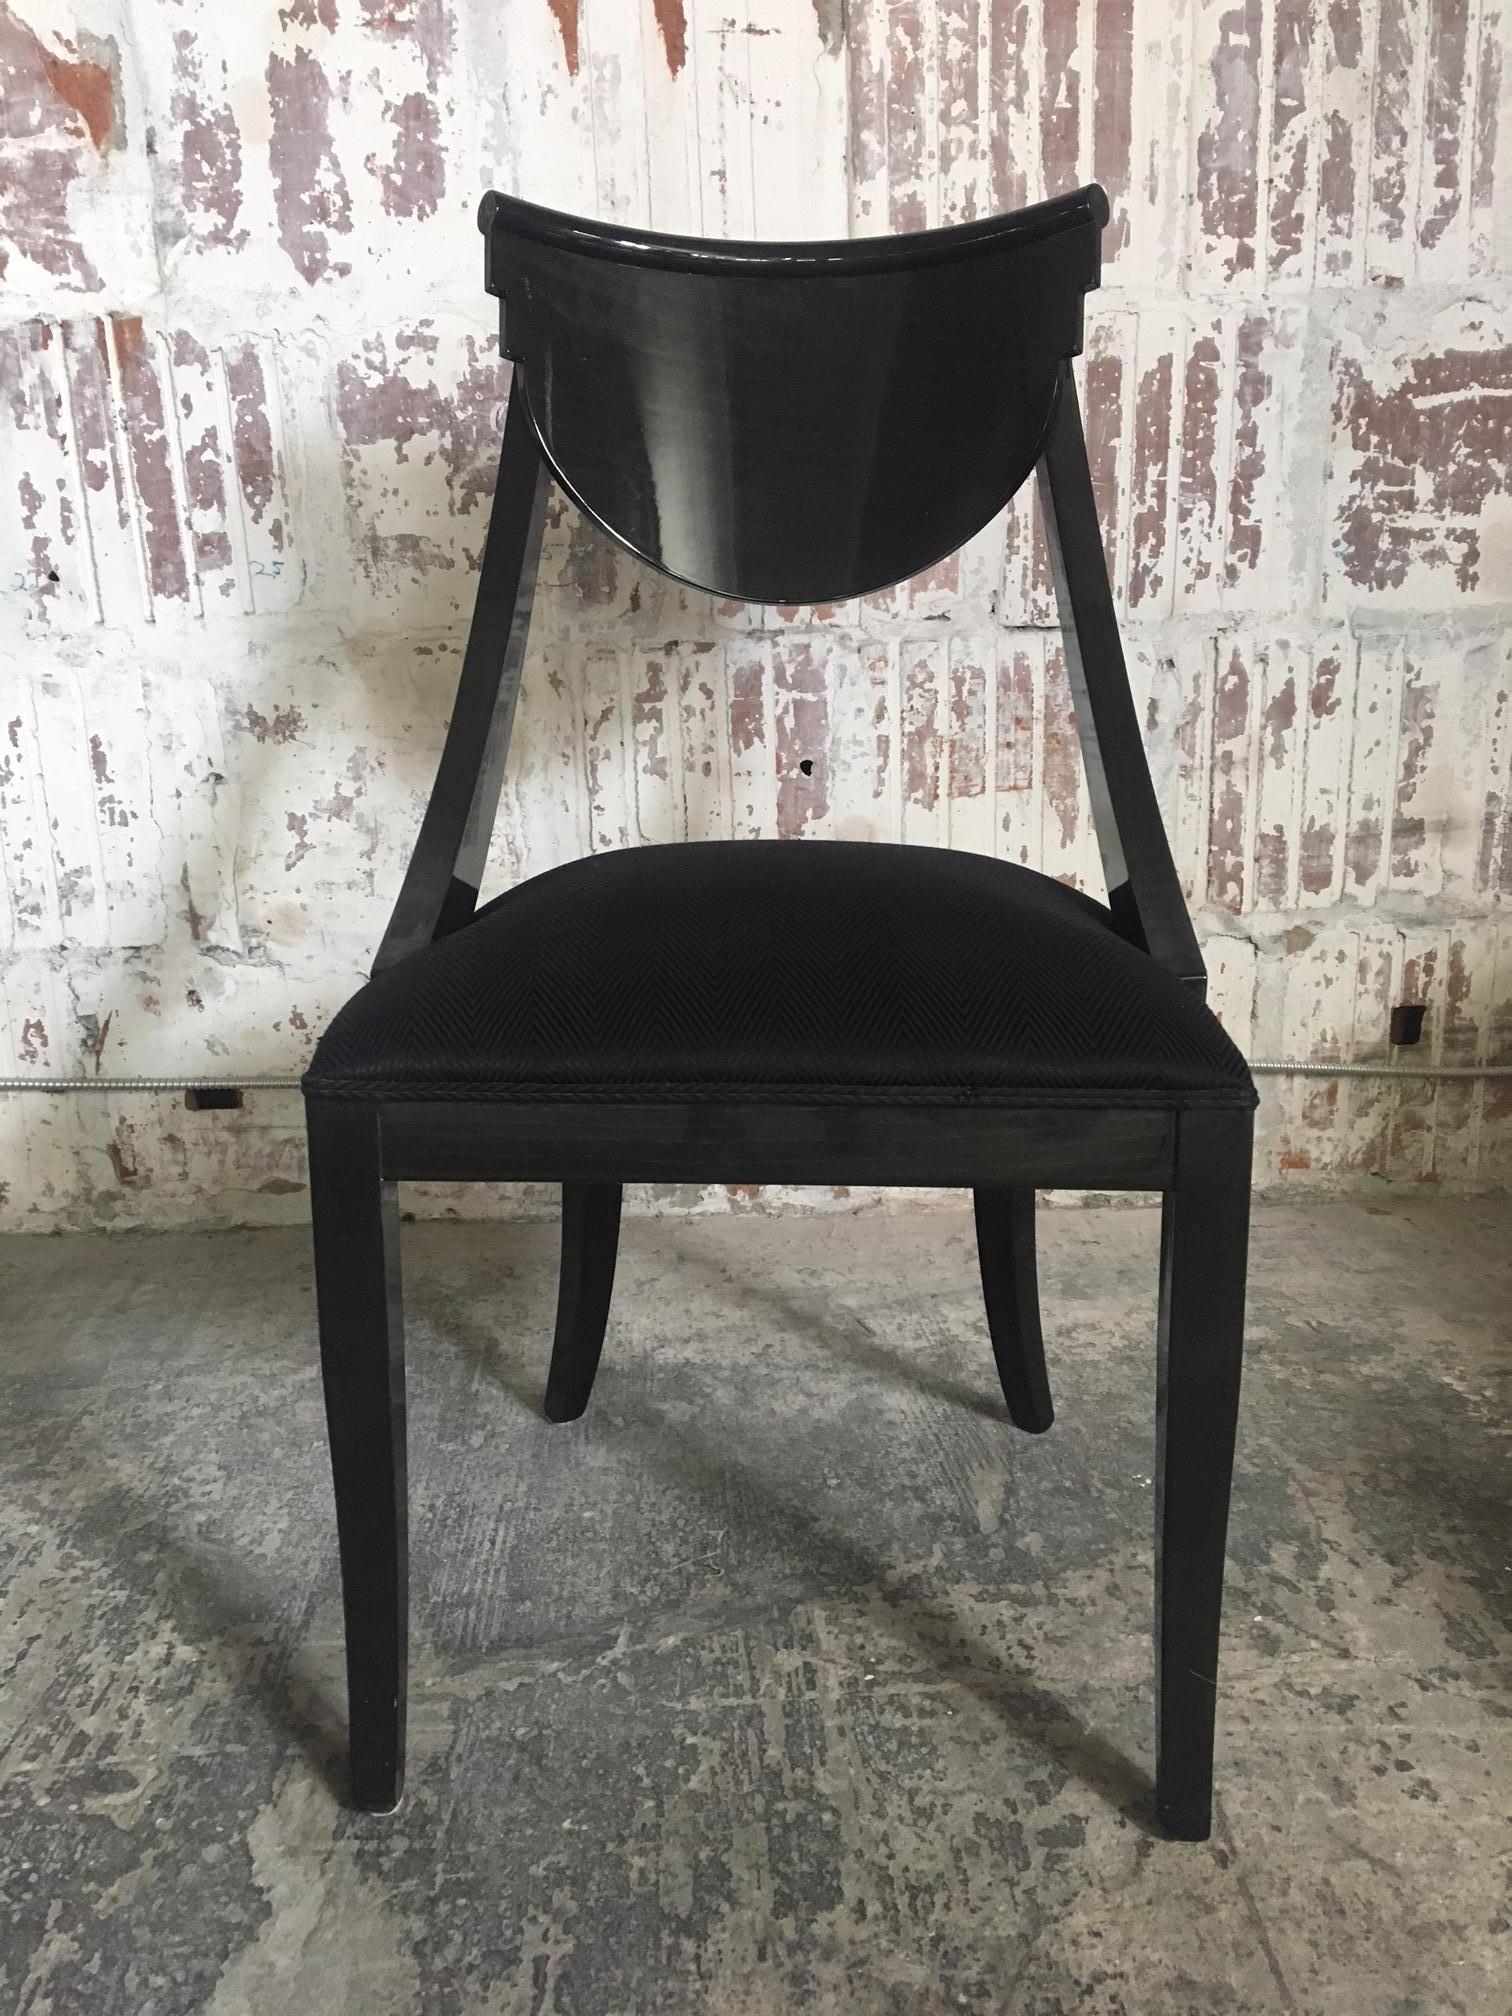 Set of six black lacquered dining chairs designed by Pietro Constantini for Ello Furniture, circa 1970s. Finish is a glossy deep black stain that allows a hint of wood grain to show through. Excellent vintage condition, both finish and upholstery.